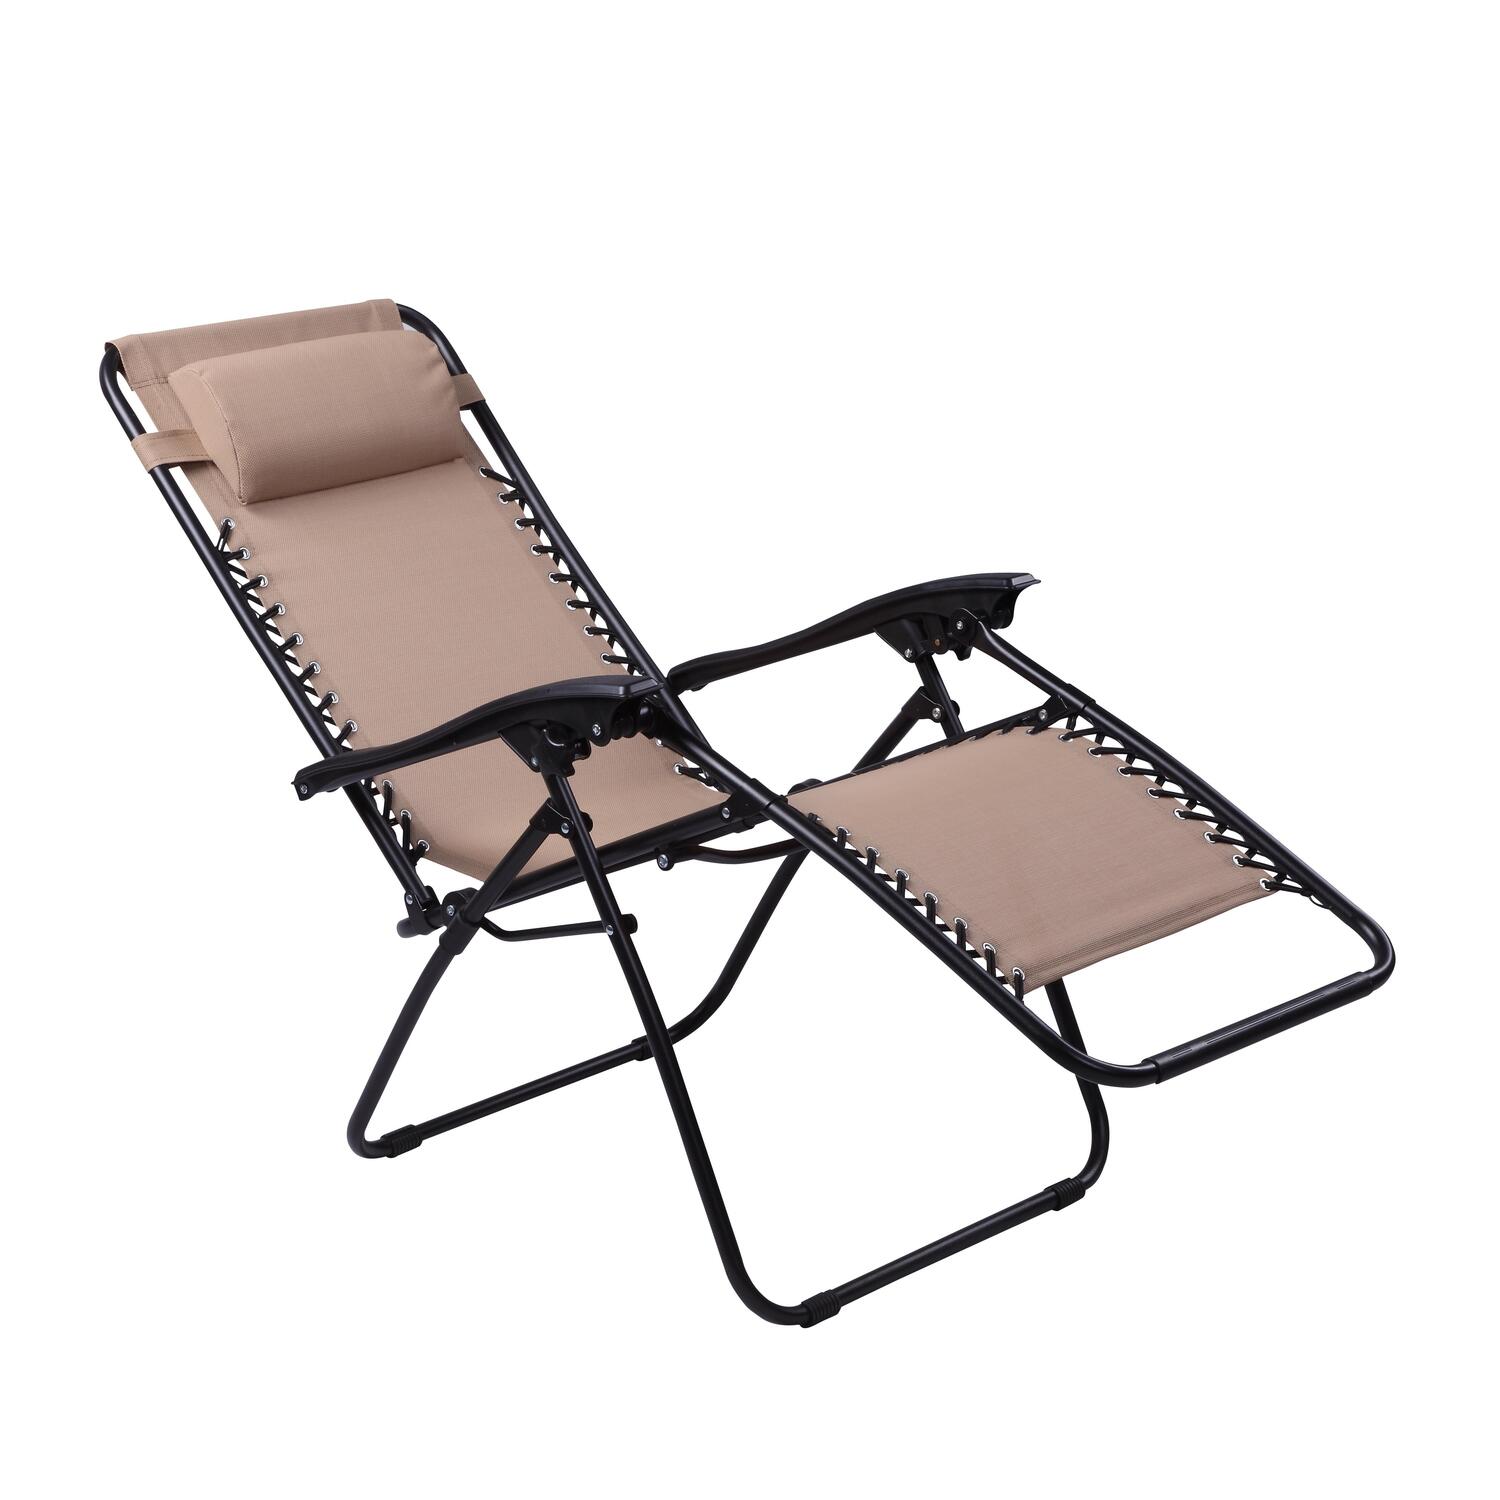 Zero Gravity Chairs Set of 4 Pool Lounge Chair Zero Gravity Recliner Lawn Patio Outdoor Porch Beach Backyard Anti Gravity Chair Folding Reclining Camping Chair, Off-White - image 1 of 7